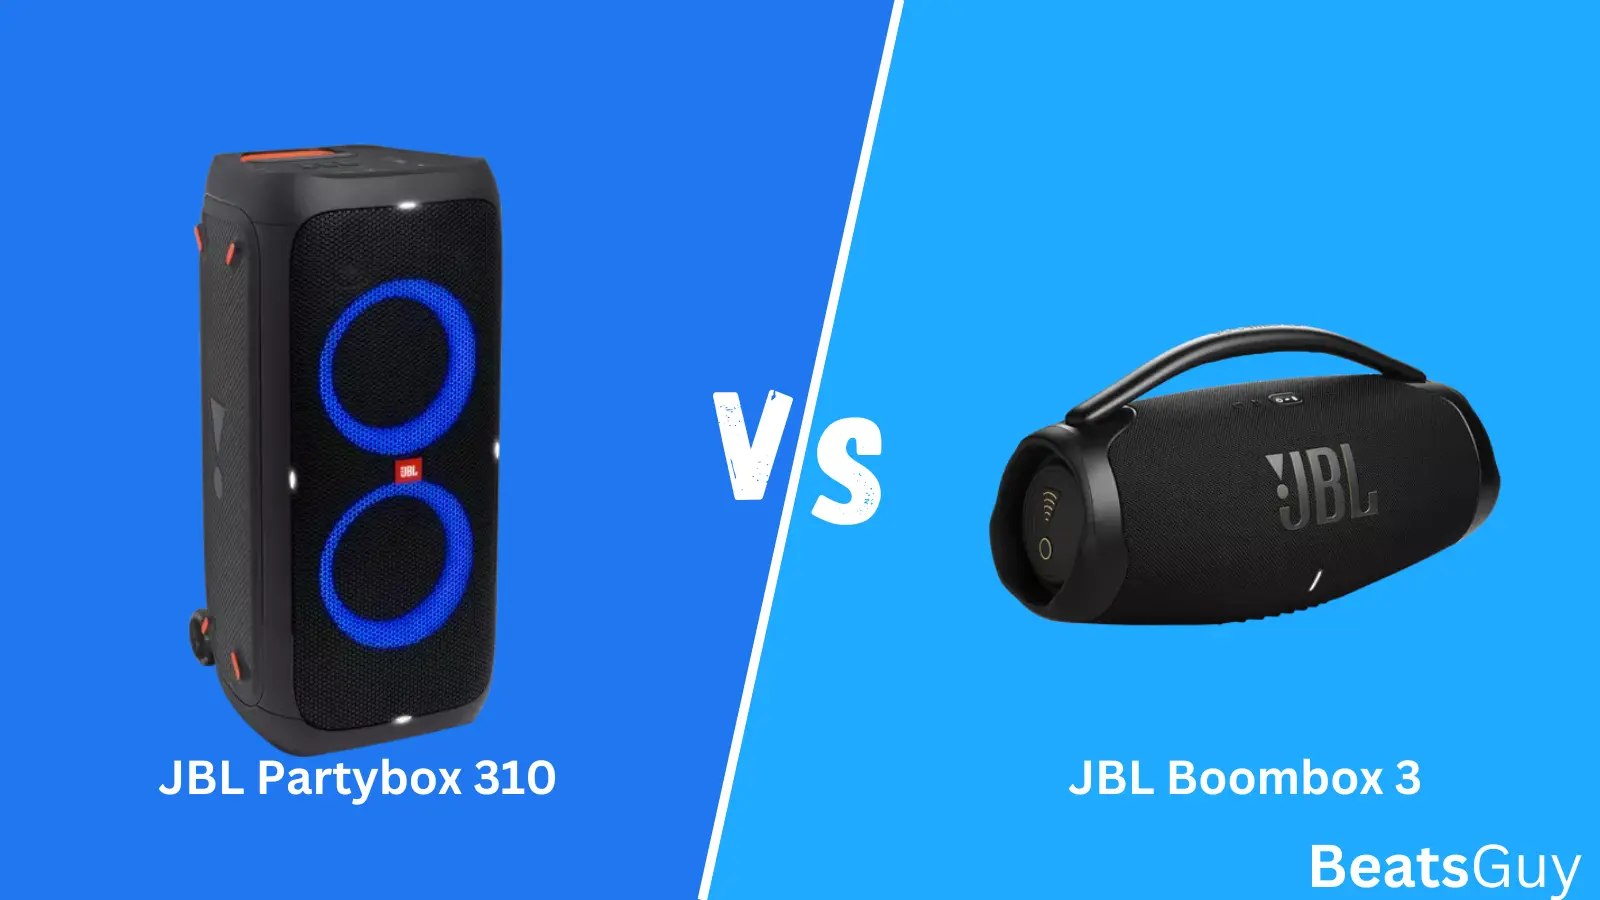 JBL Boombox 3 Vs Partybox 310: Which Is Best?